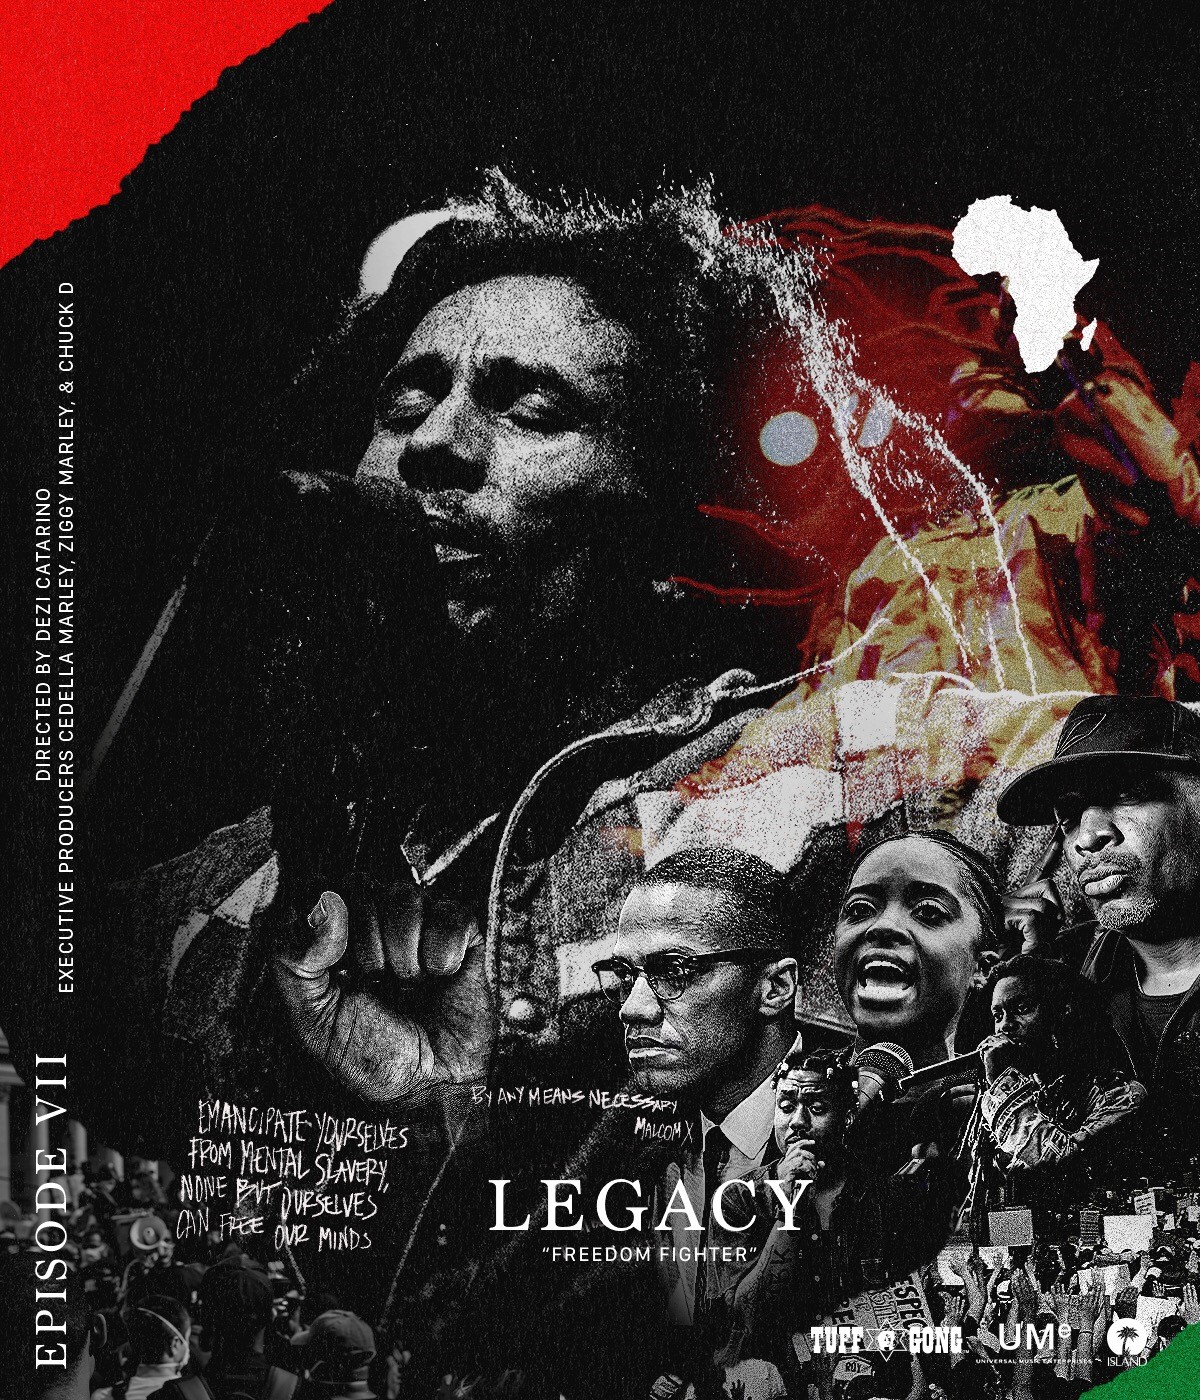 Bob Marley: Legacy Documentary Series Continues with Powerful New Episode ‘Freedom Fighters”, Out Today